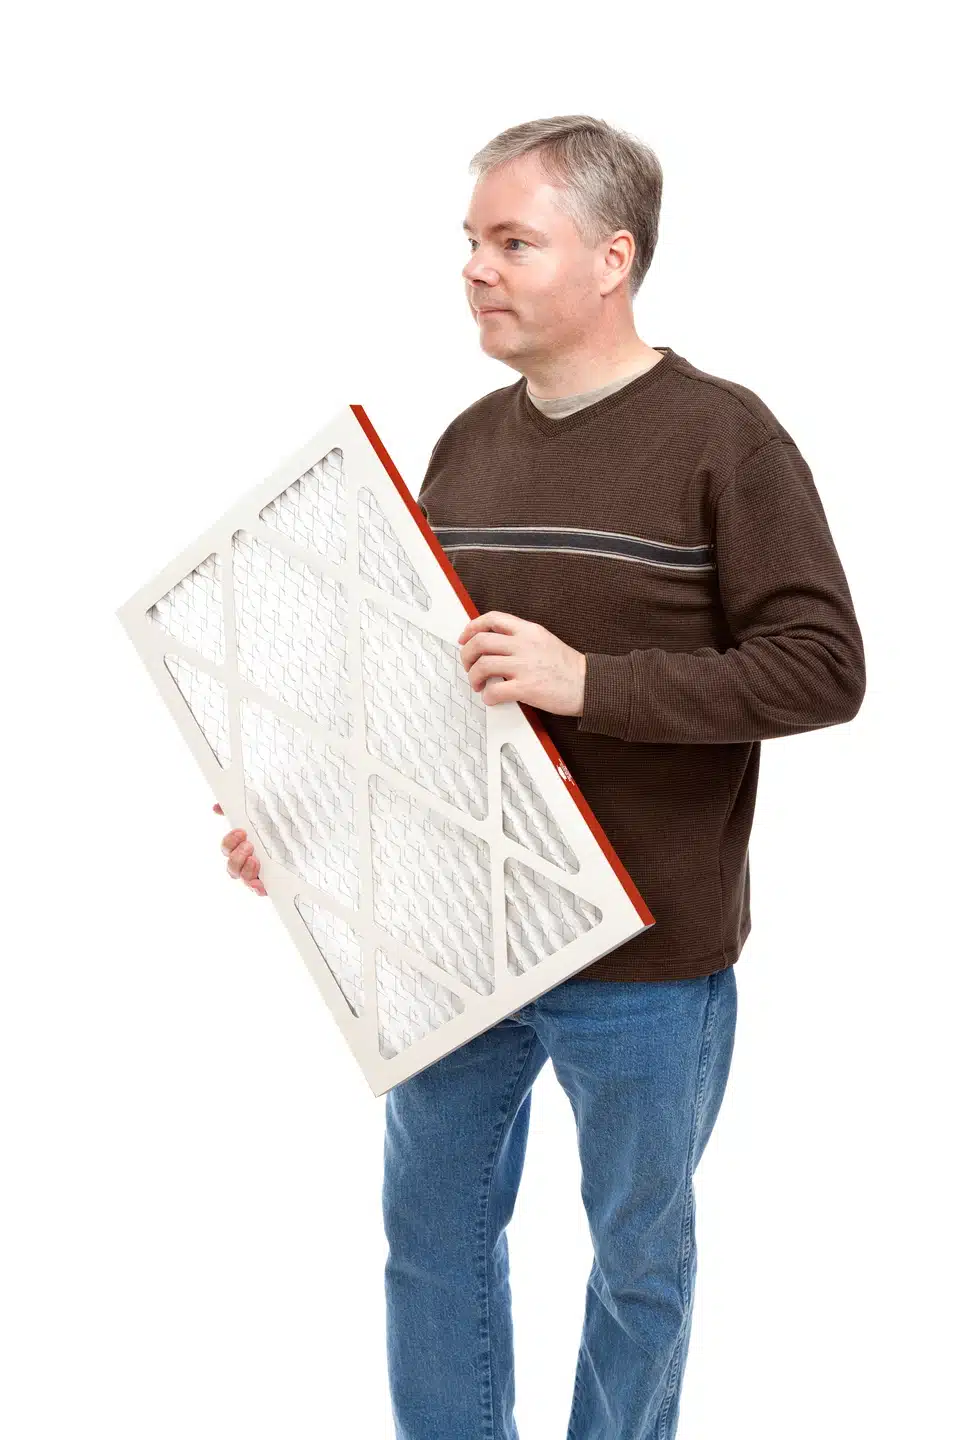 Important Reminder: Change the AC’s Air Filter Regularly! - Dowd HVAC